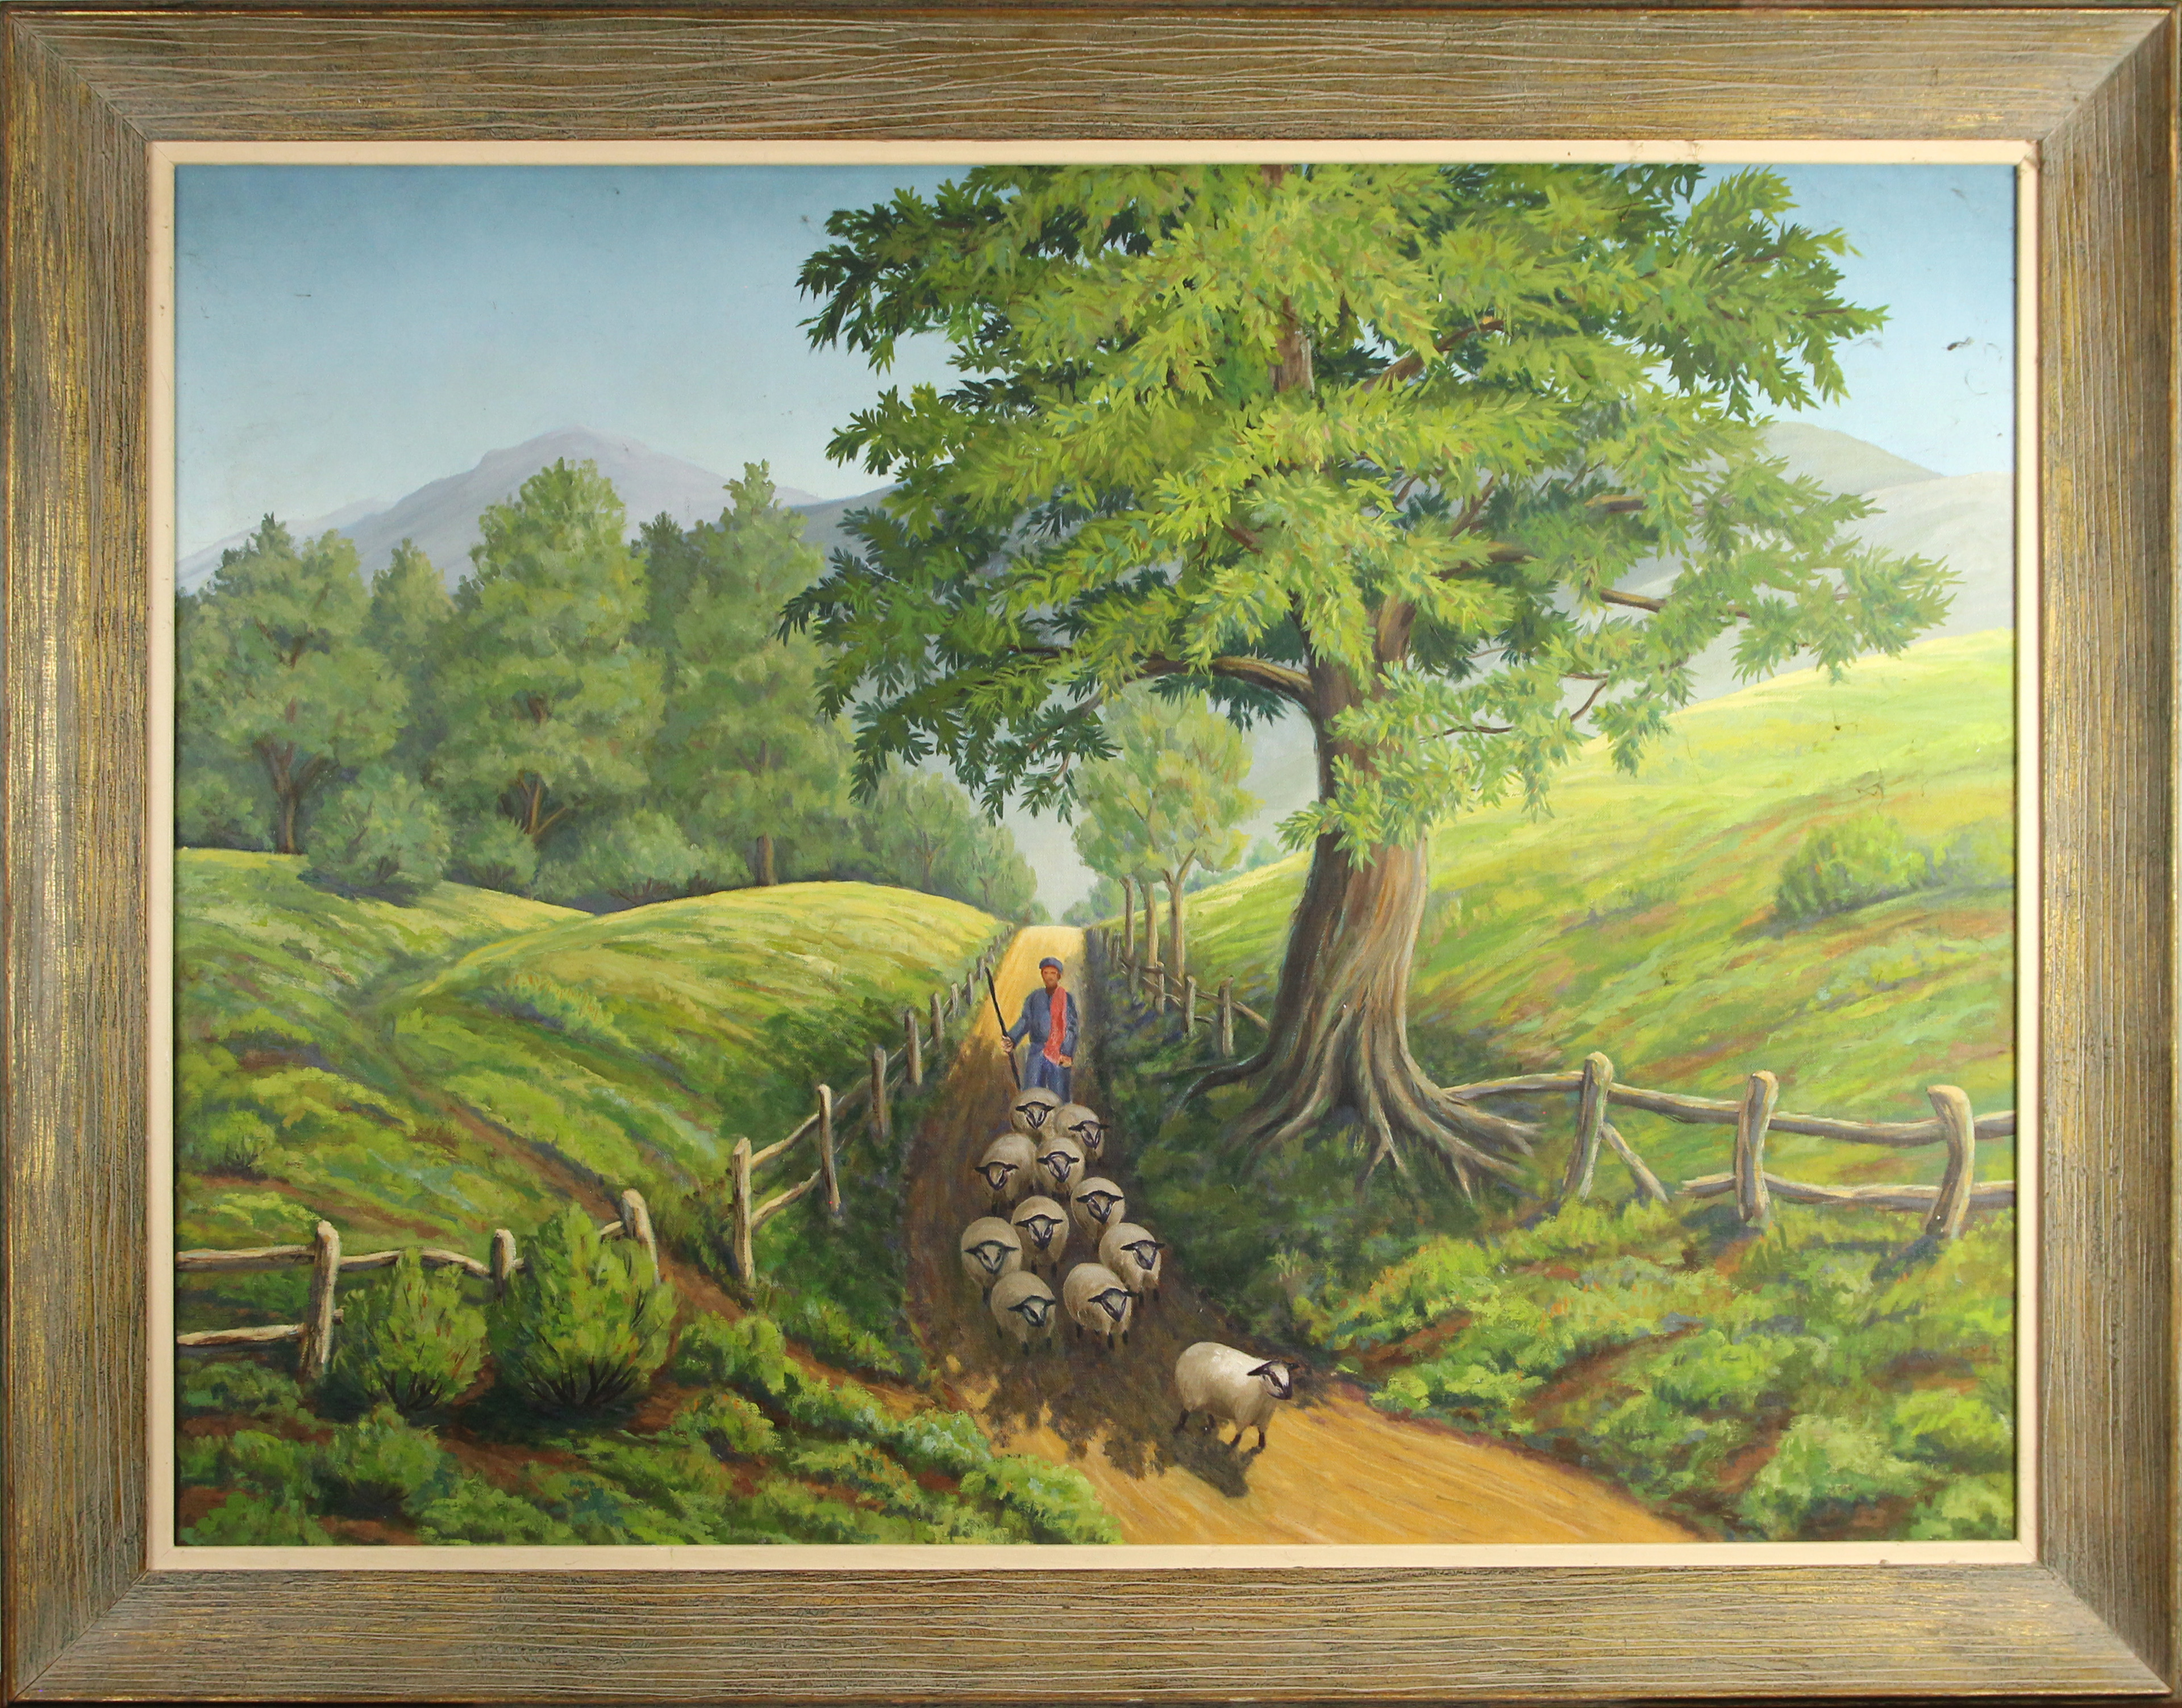 PAINTING SHEEP HERDER IN THE FIELD 3a614e